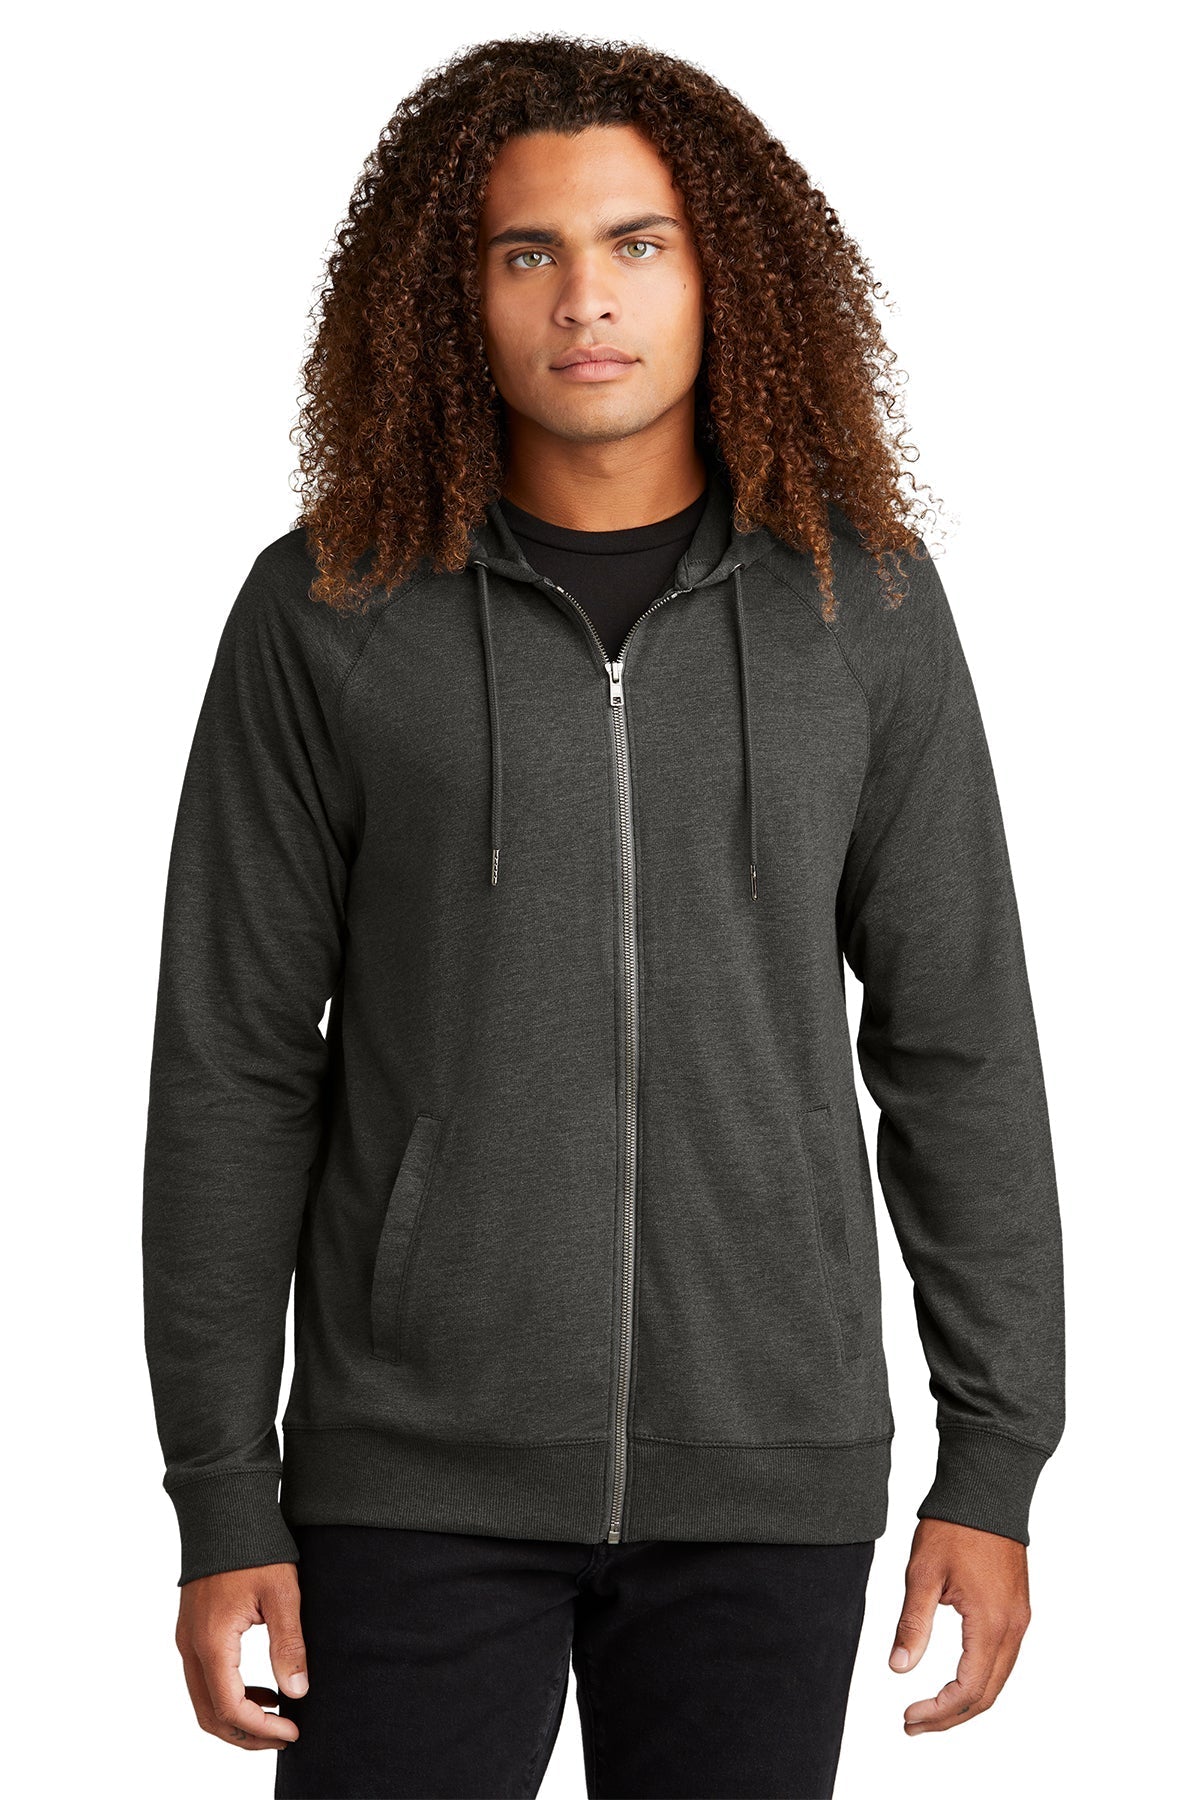 DT573 District Featherweight French Terry Full-Zip Hoodie